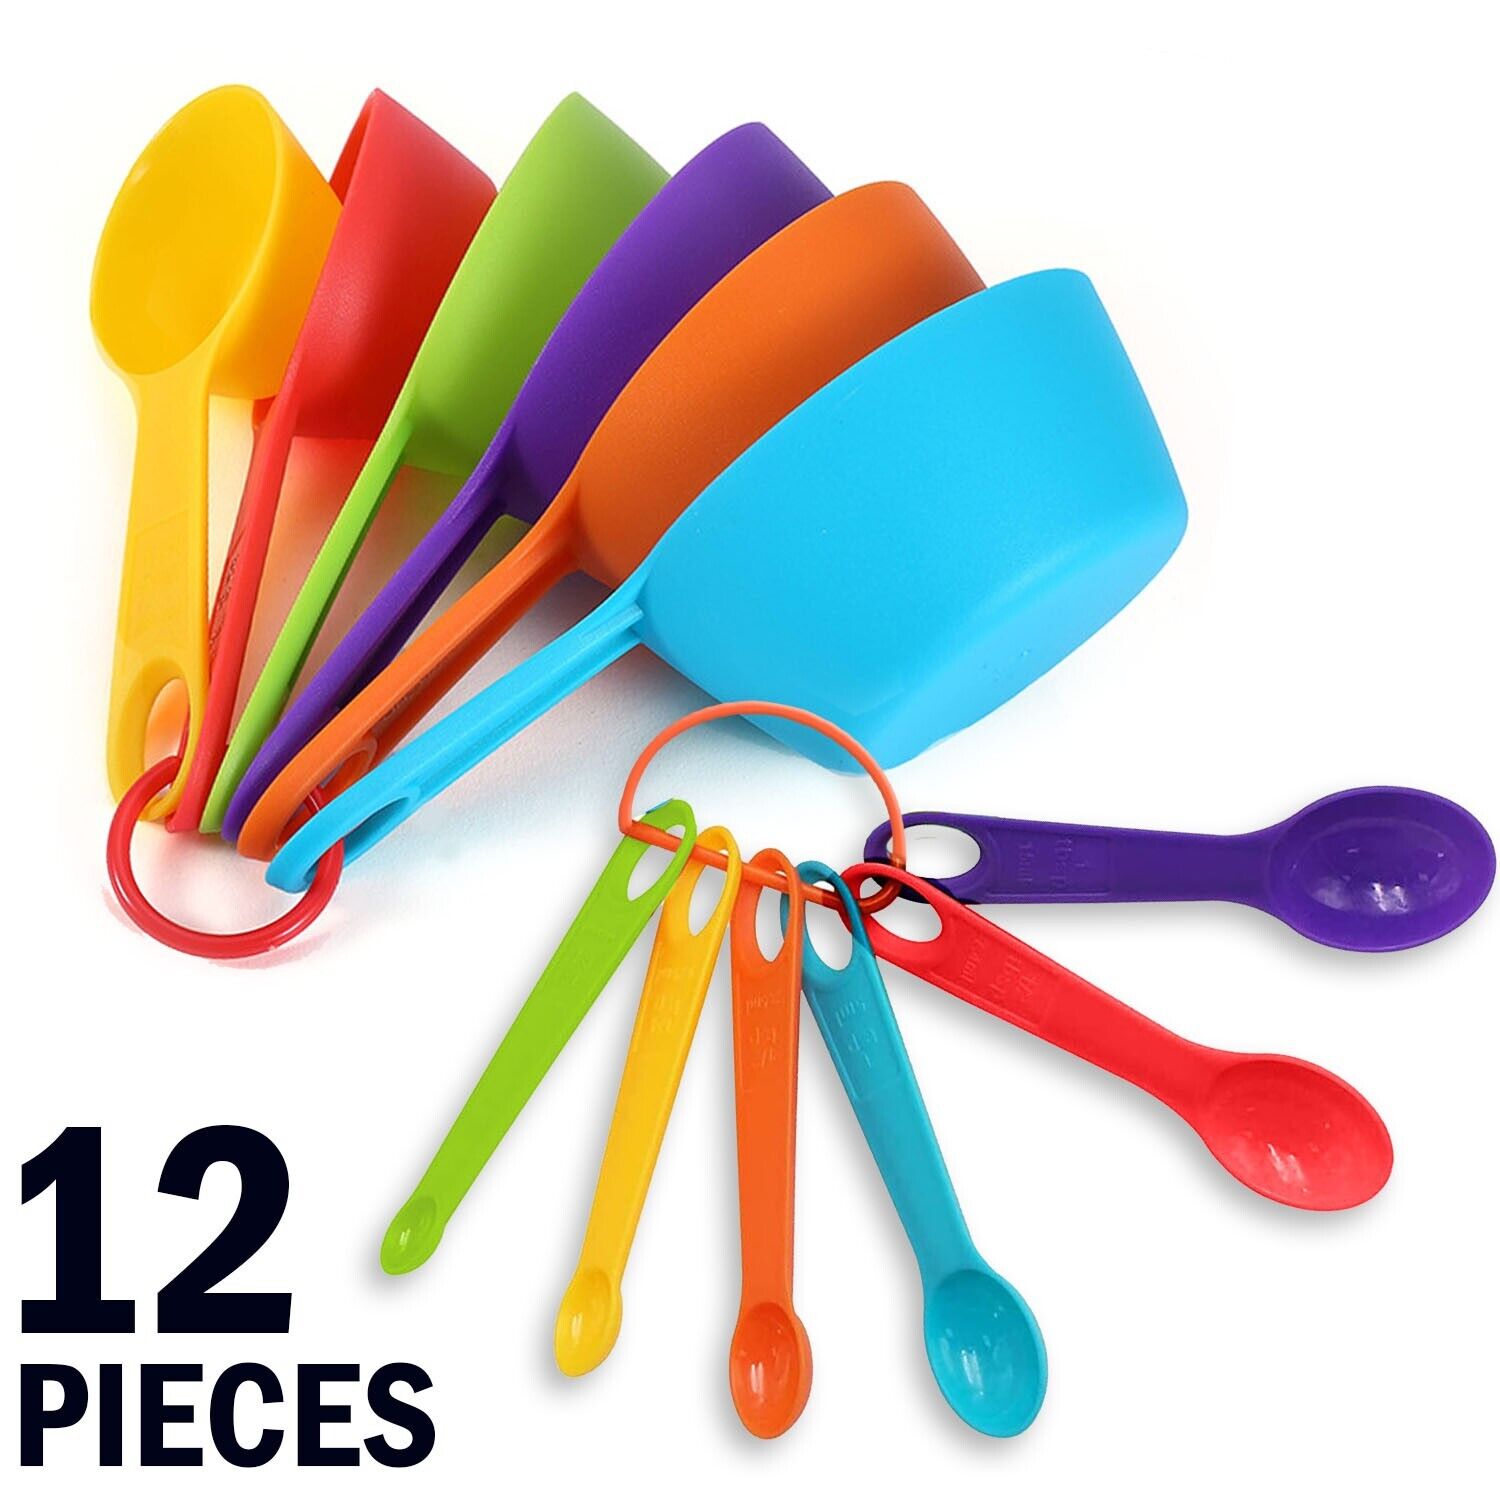 Multi-Color Measuring Cups And Spoons 12 Piece Set Plastic Cooking Kitchen Tools